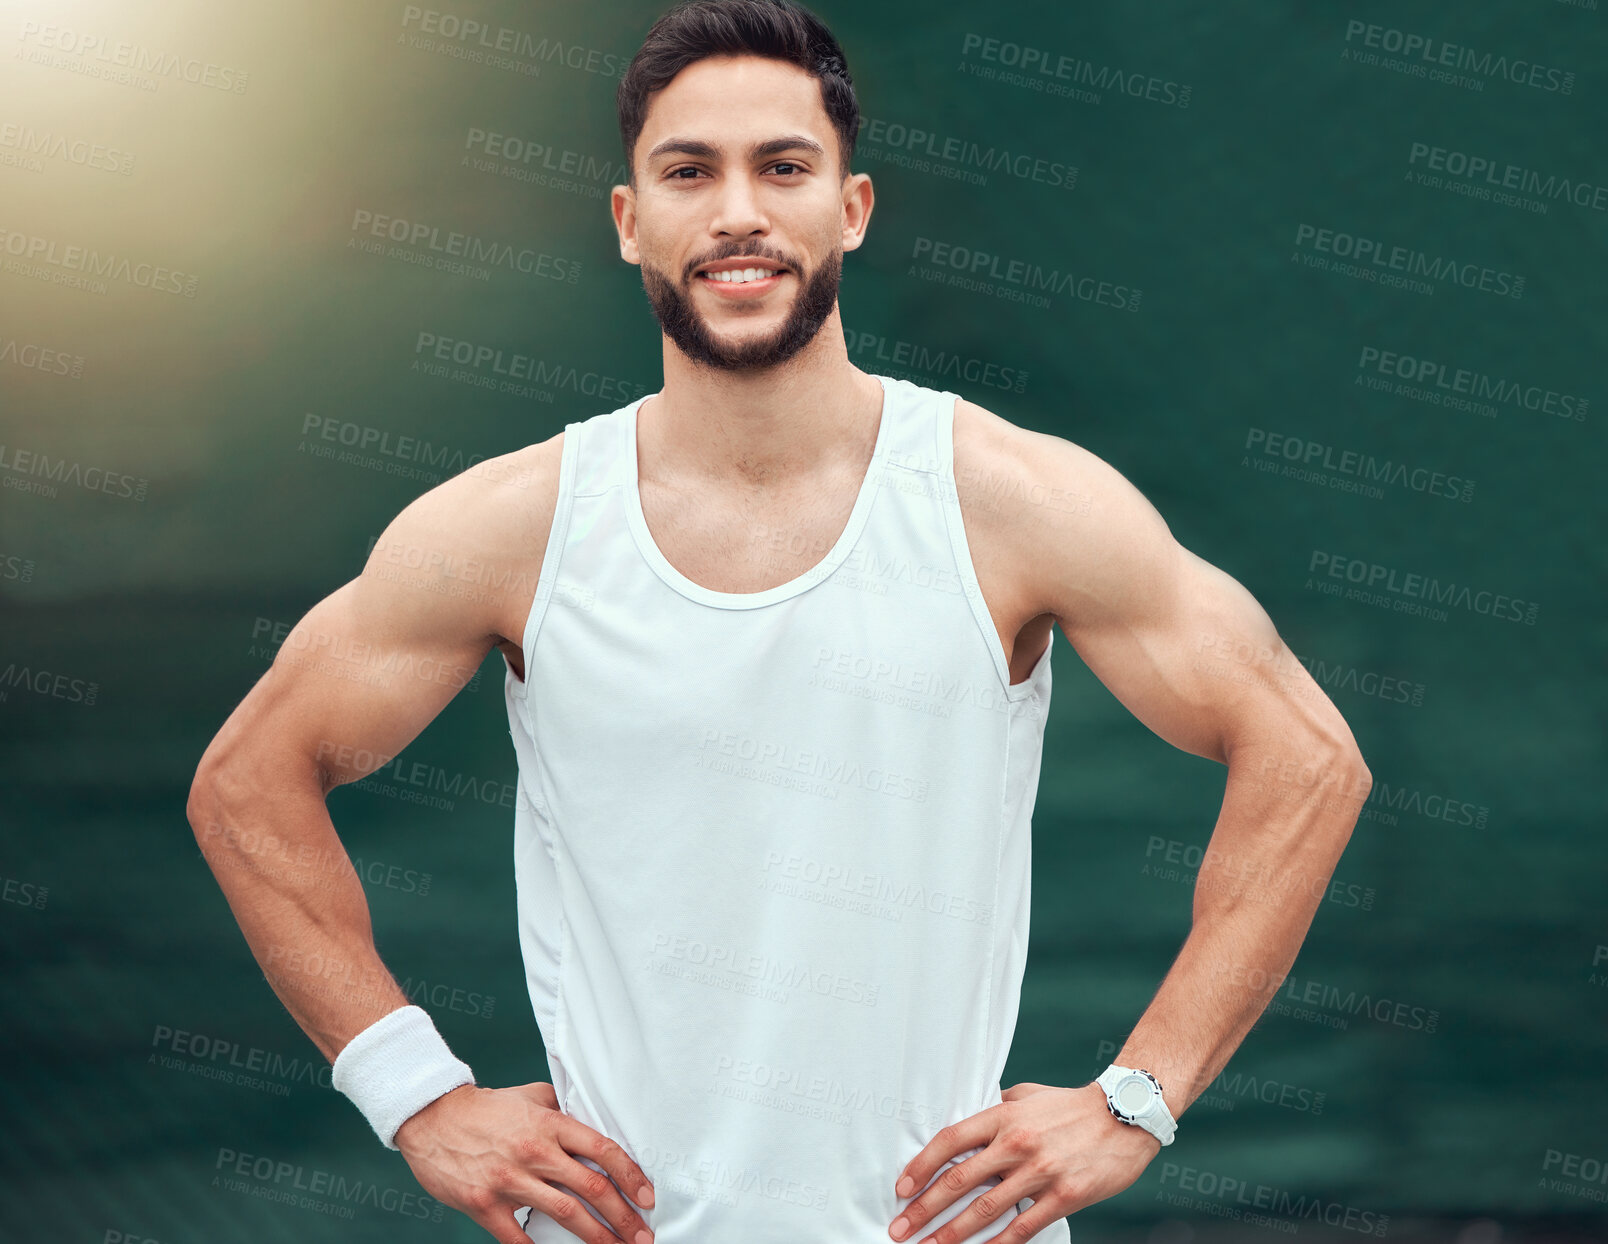 Buy stock photo Sports, tennis and portrait of happy man with confidence, fitness mindset and muscle on game court. Workout goals, pride and happiness, male athlete with smile, motivation for health and wellness.